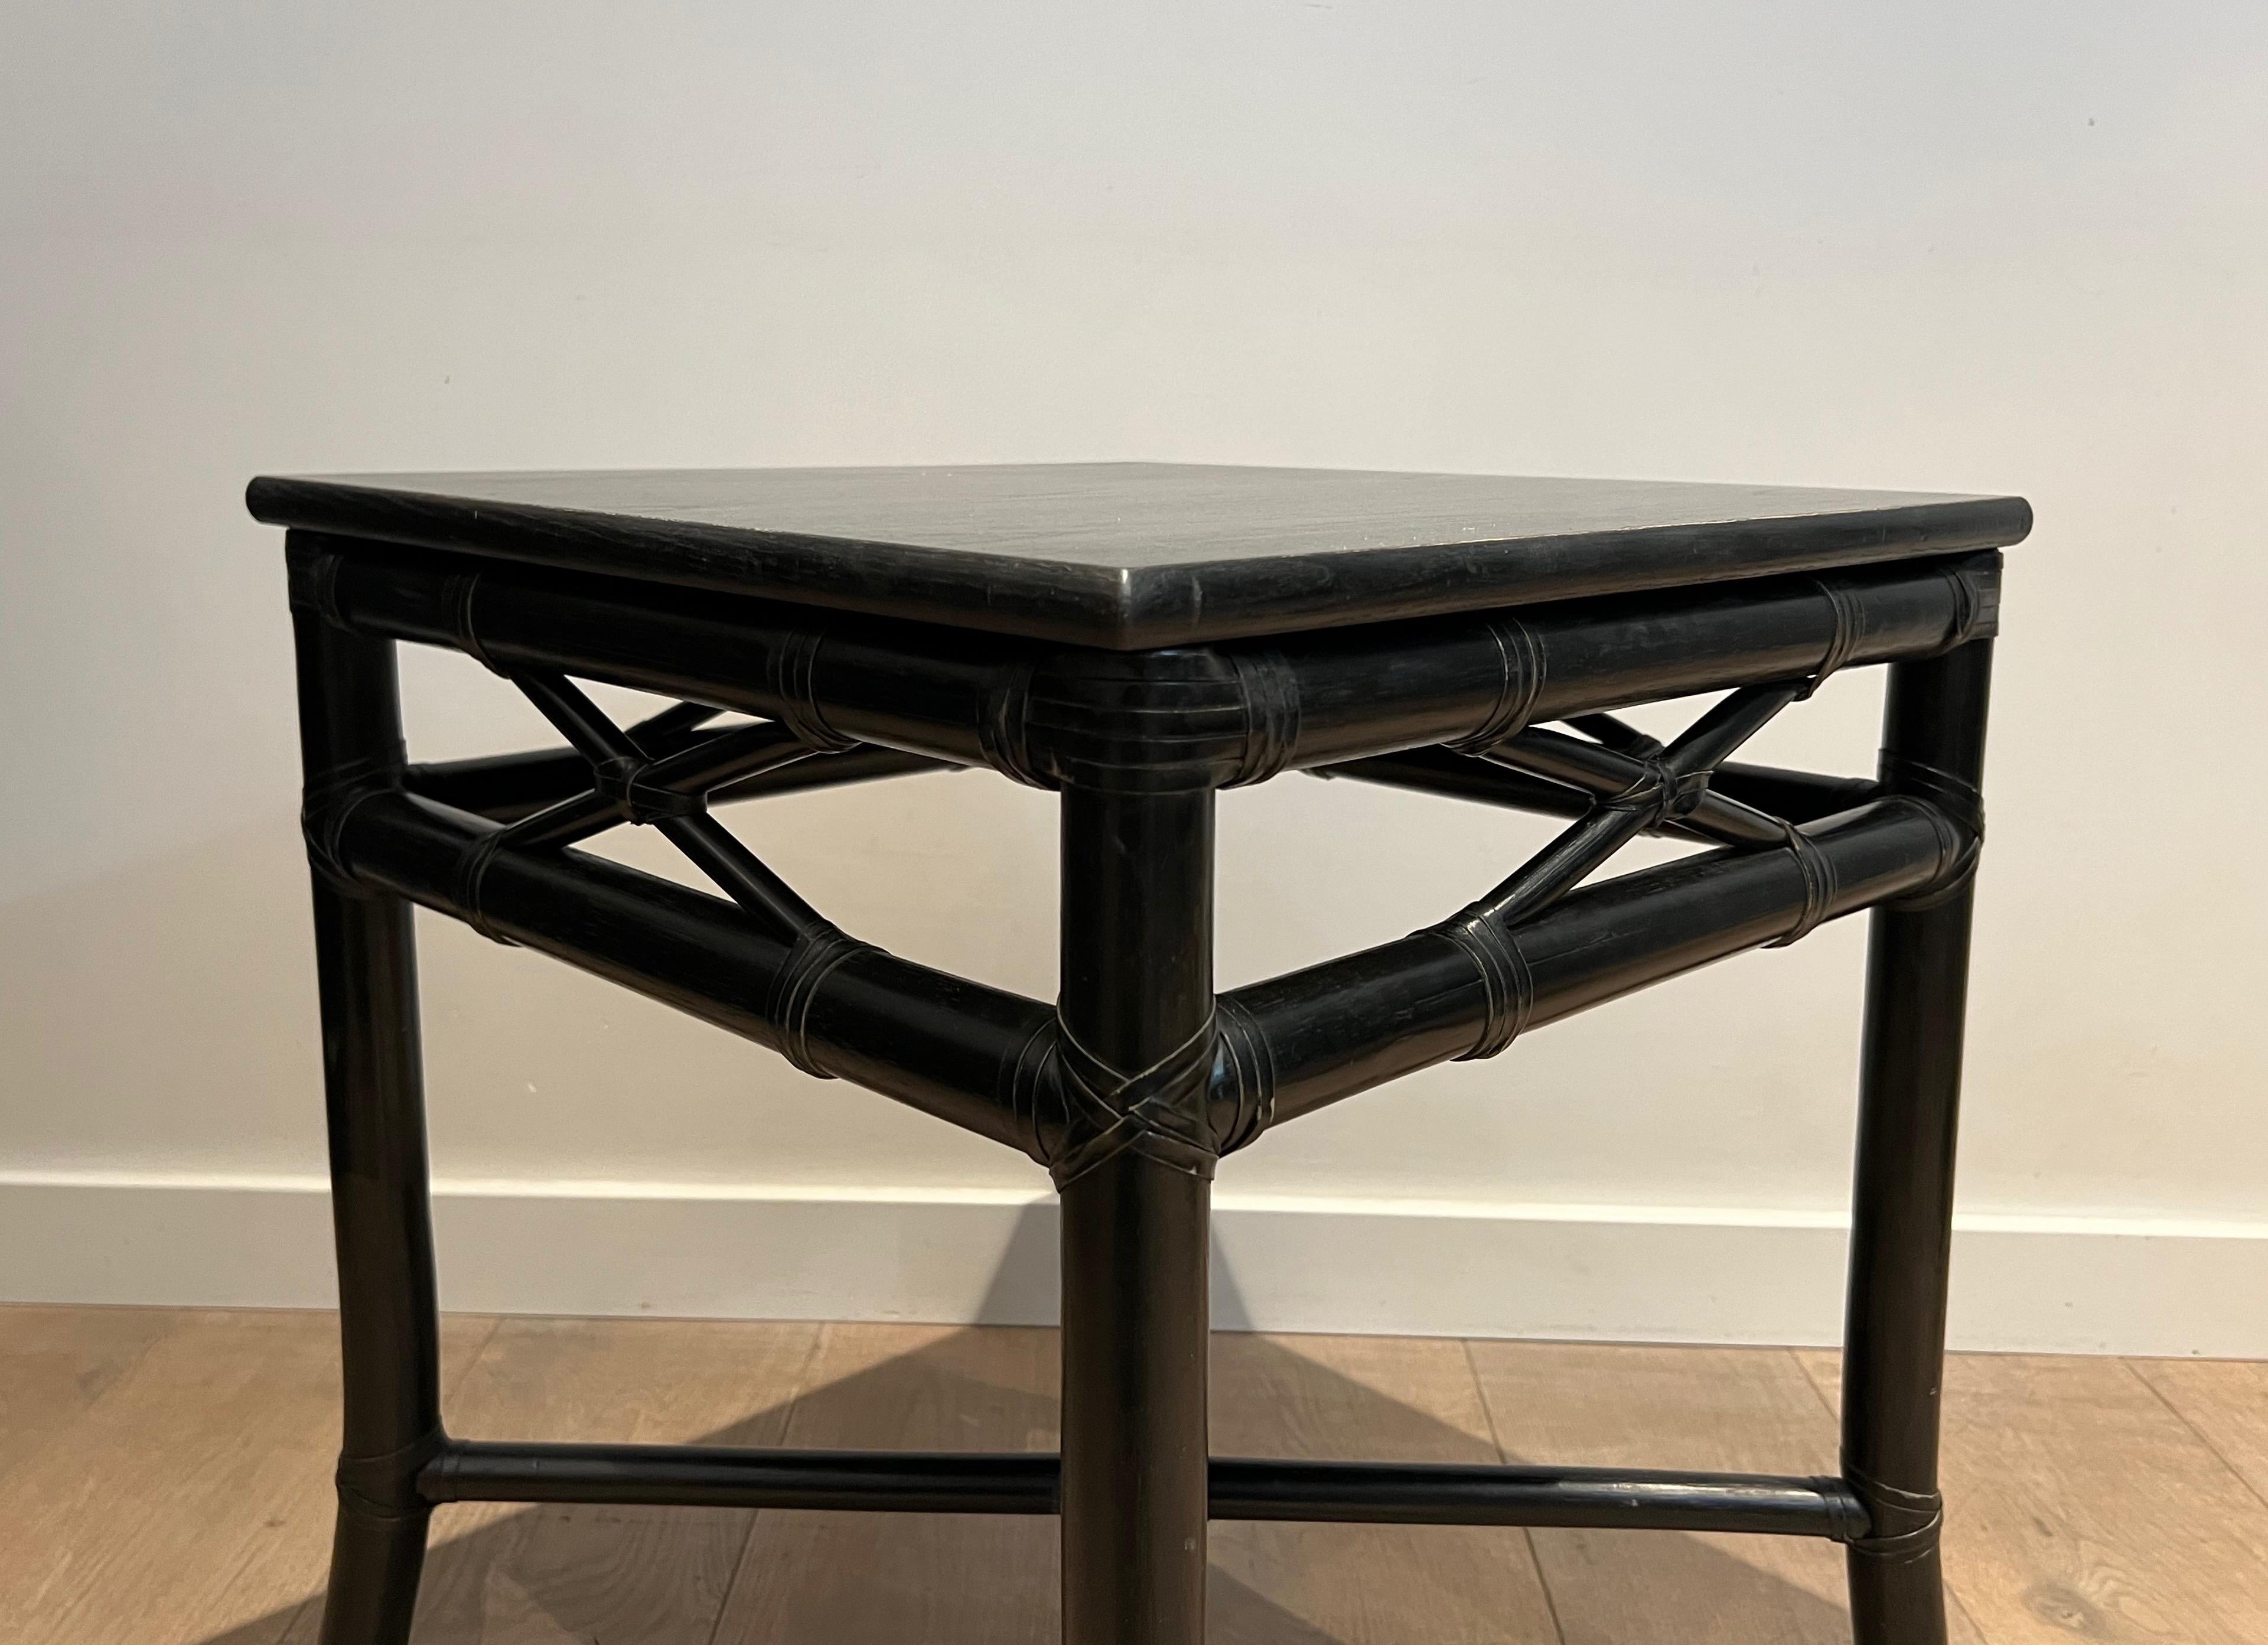 Blackened Pair of Black Lacquered Faux-Bamboo Side Tables by Gasparucci For Sale